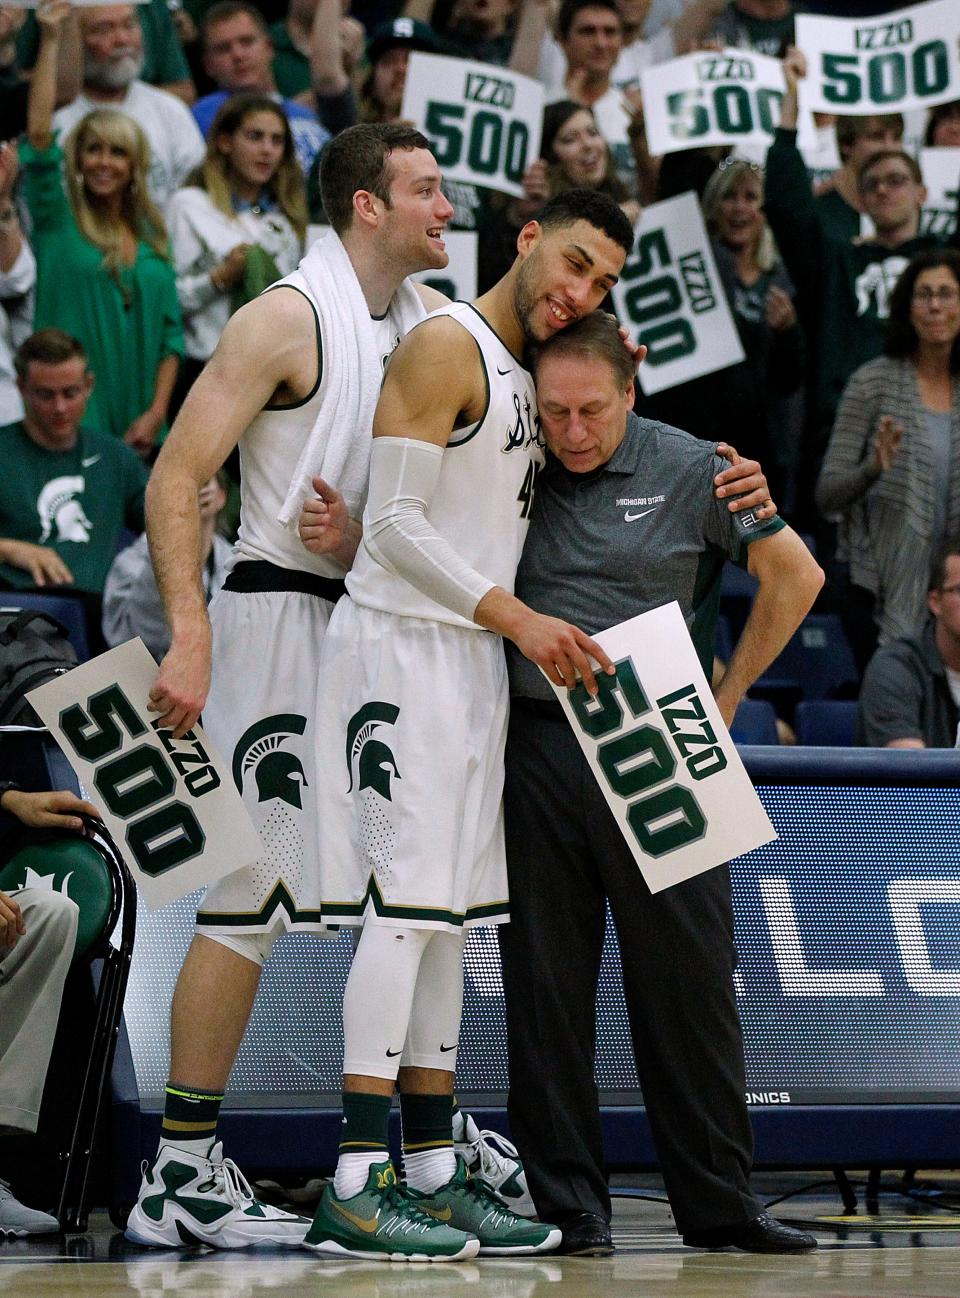 Senior guard Denzel Valentine made sure Tom Izzo got his 500th win, putting up a triple-double in Fullerton, Calif., then gave his coach a hug after the game as Matt Costello, left, looked on.